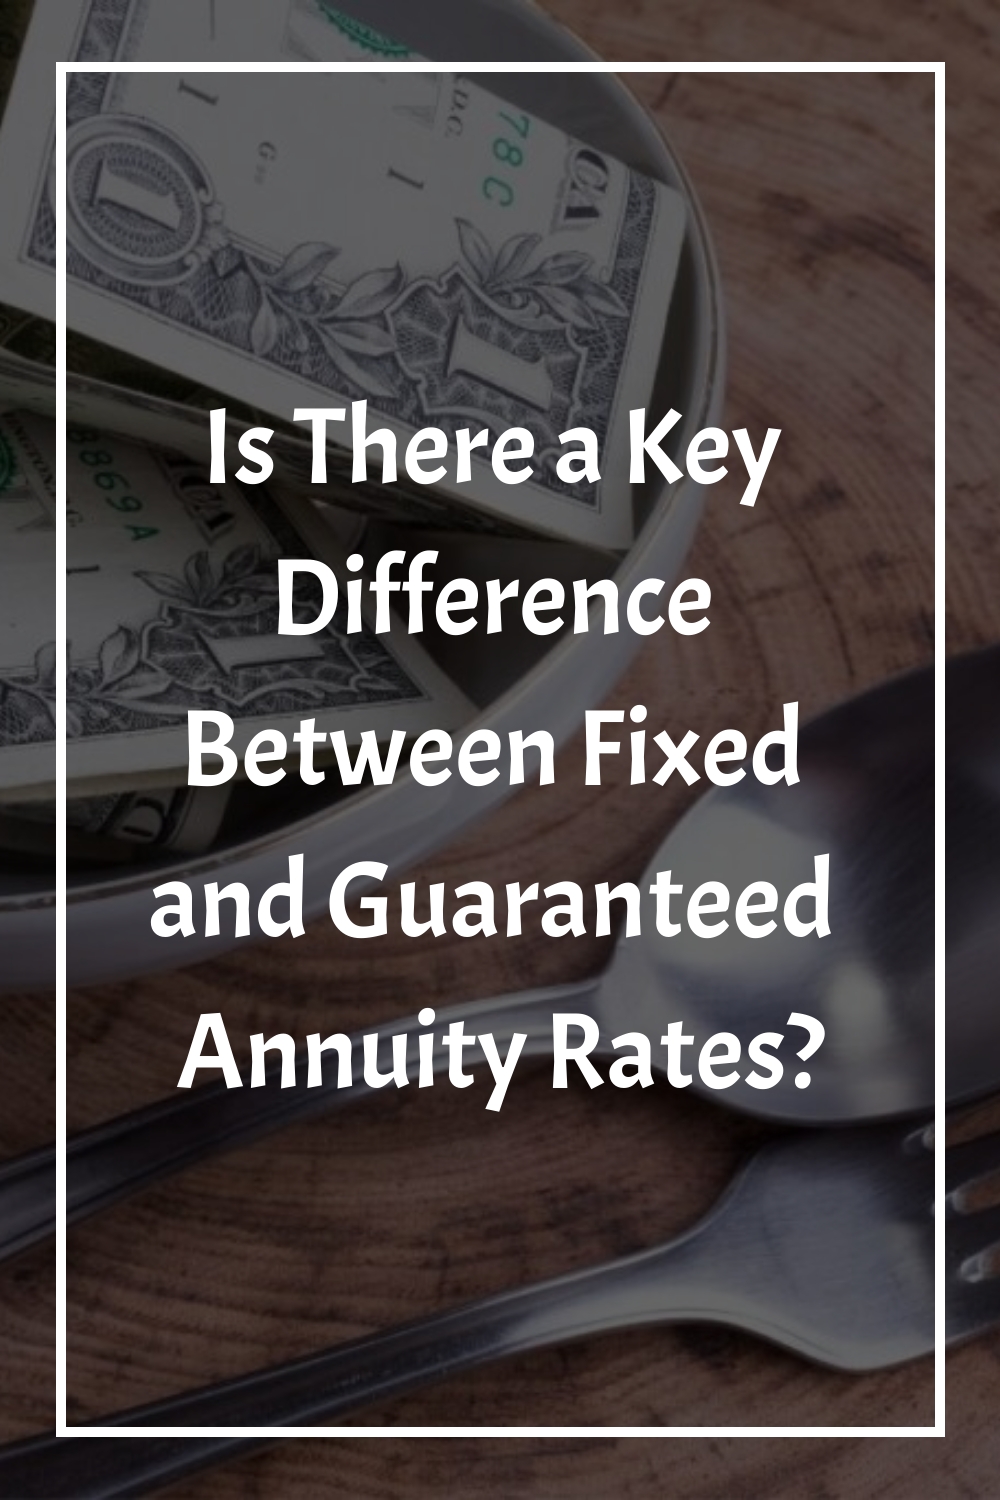 Is There a Key Difference Between Fixed and Guaranteed Annuity Rates?